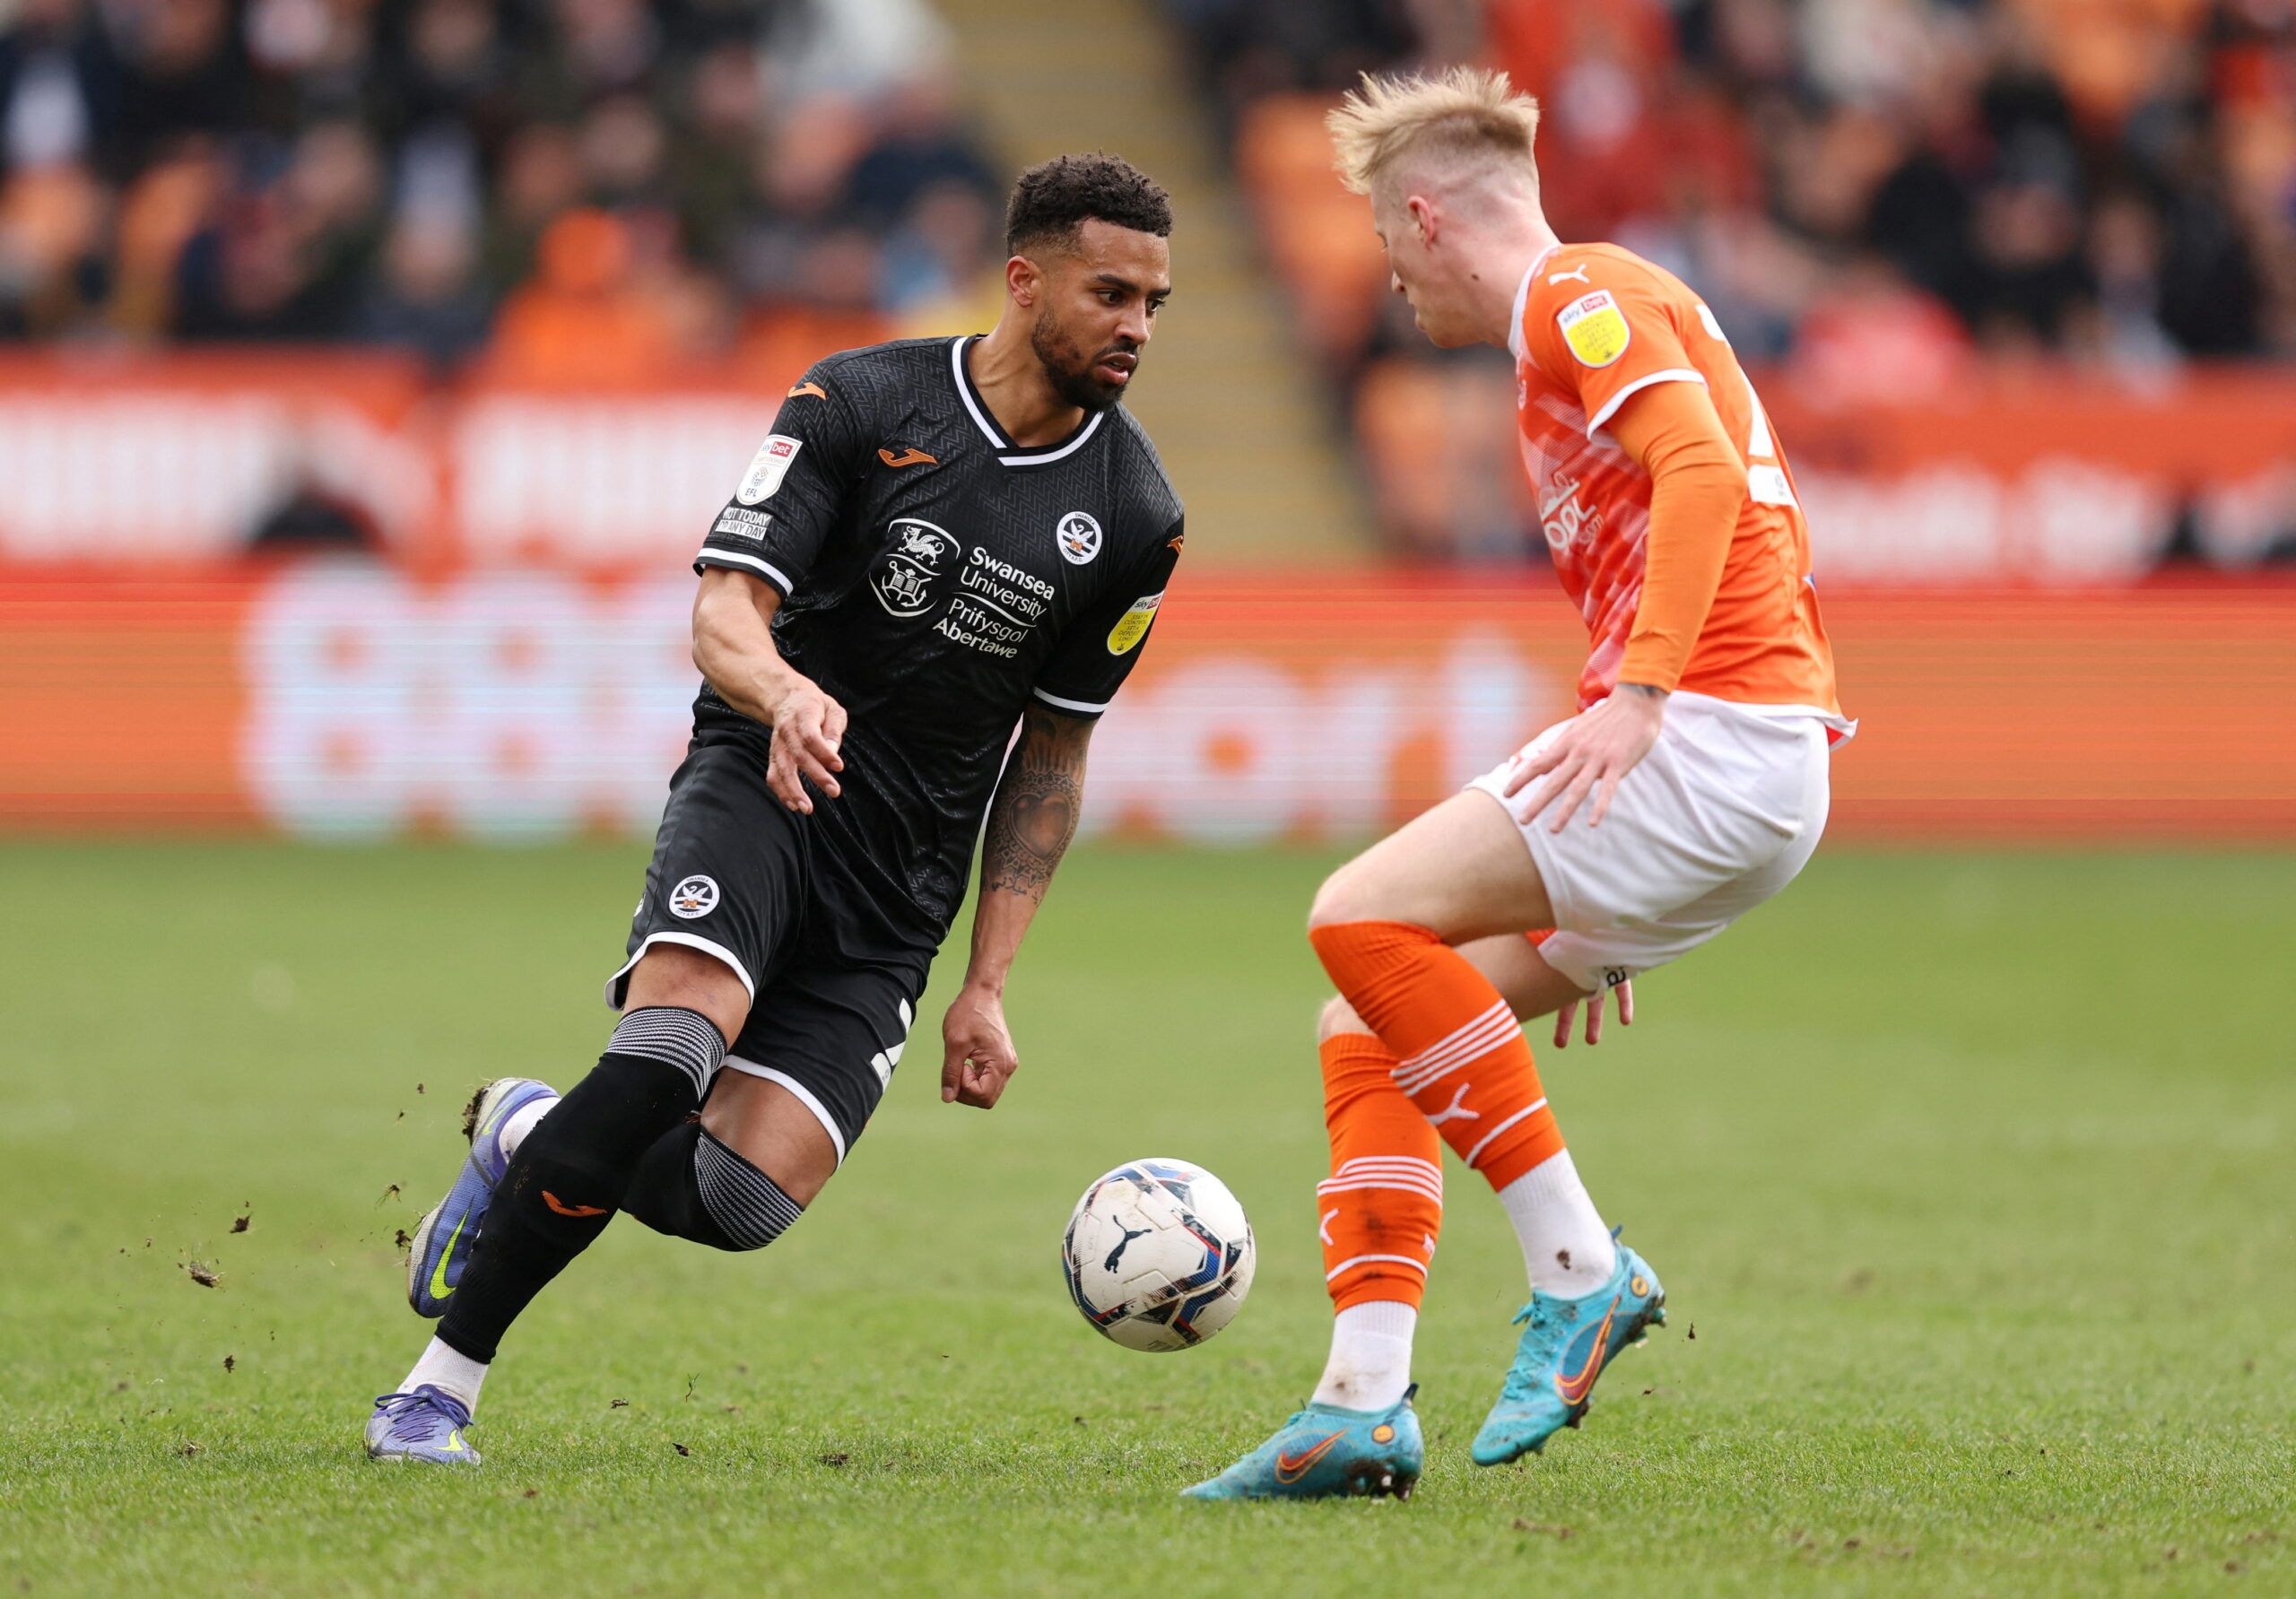 Soccer Football - Championship - Blackpool v Swansea City - Bloomfield Road, Blackpool , Britain - March 12, 2022  Swansea City's Cyrus Christie in action with Blackpool's Charlie Kirk  Action Images/John Clifton  EDITORIAL USE ONLY. No use with unauthorized audio, video, data, fixture lists, club/league logos or 